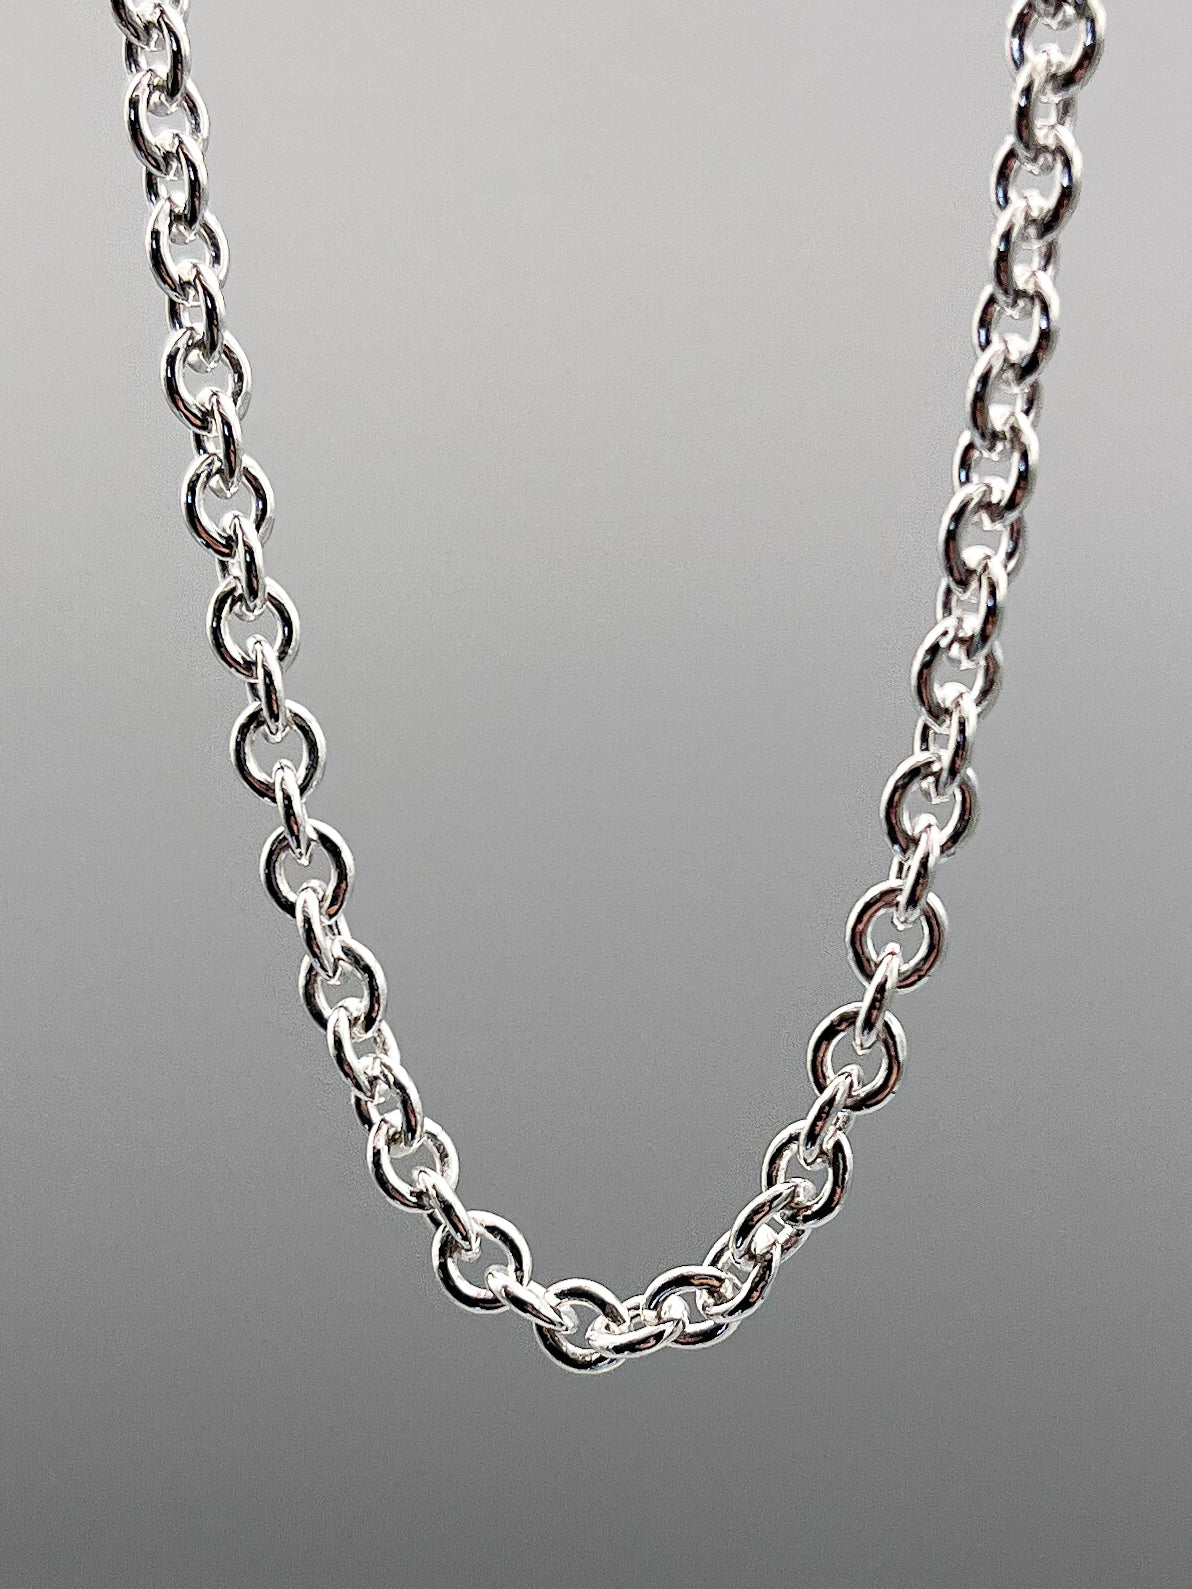 Sterling Silver Necklace. 20” (50cm) long polished 3.9mm round link